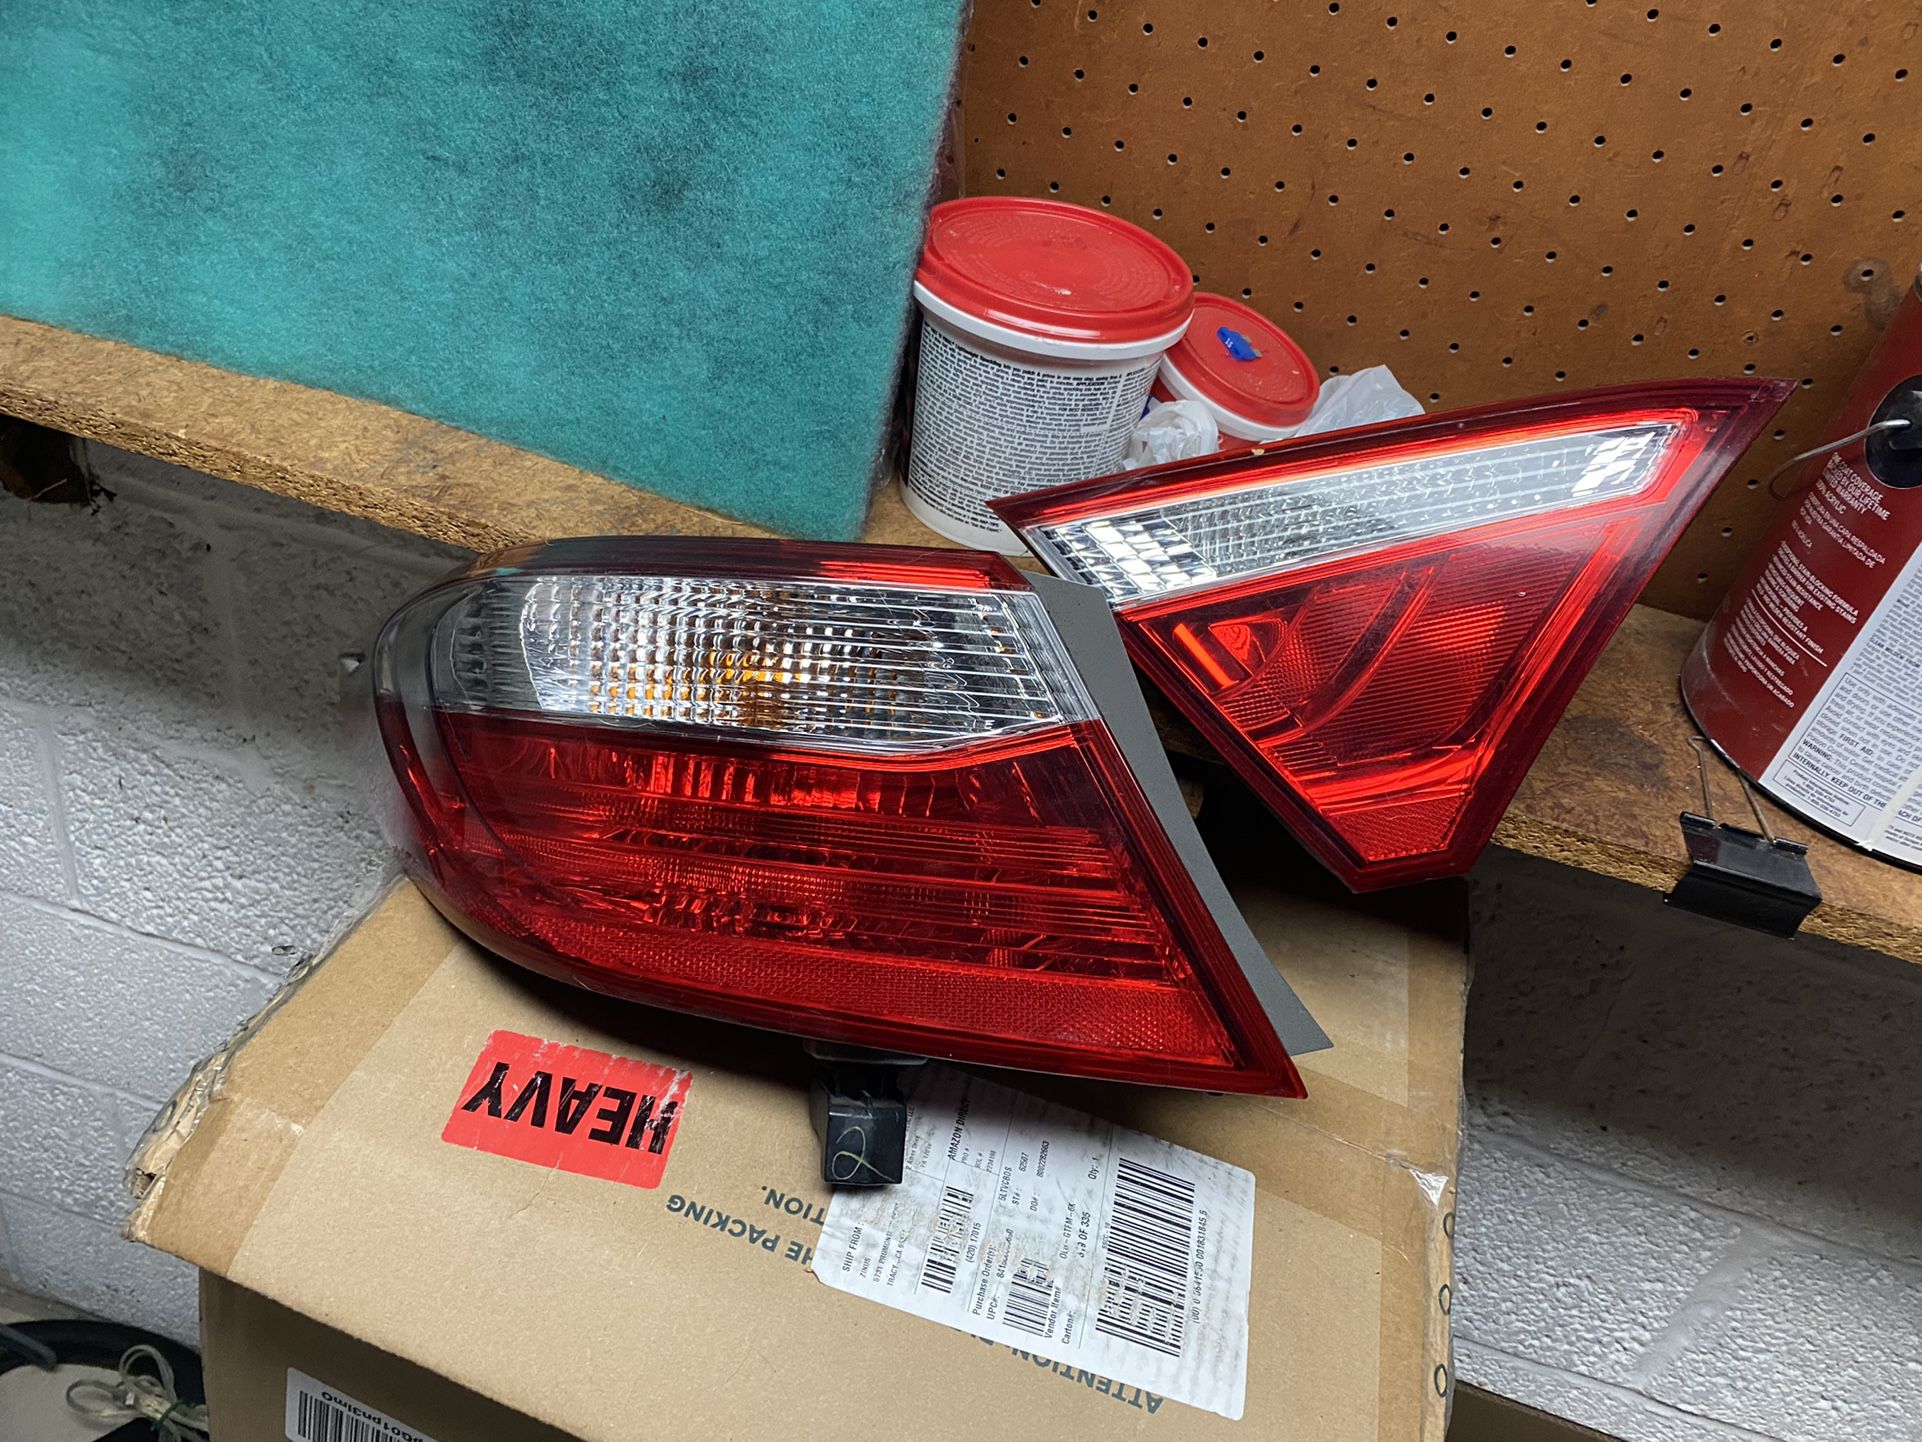 Camry 2016 tail lights